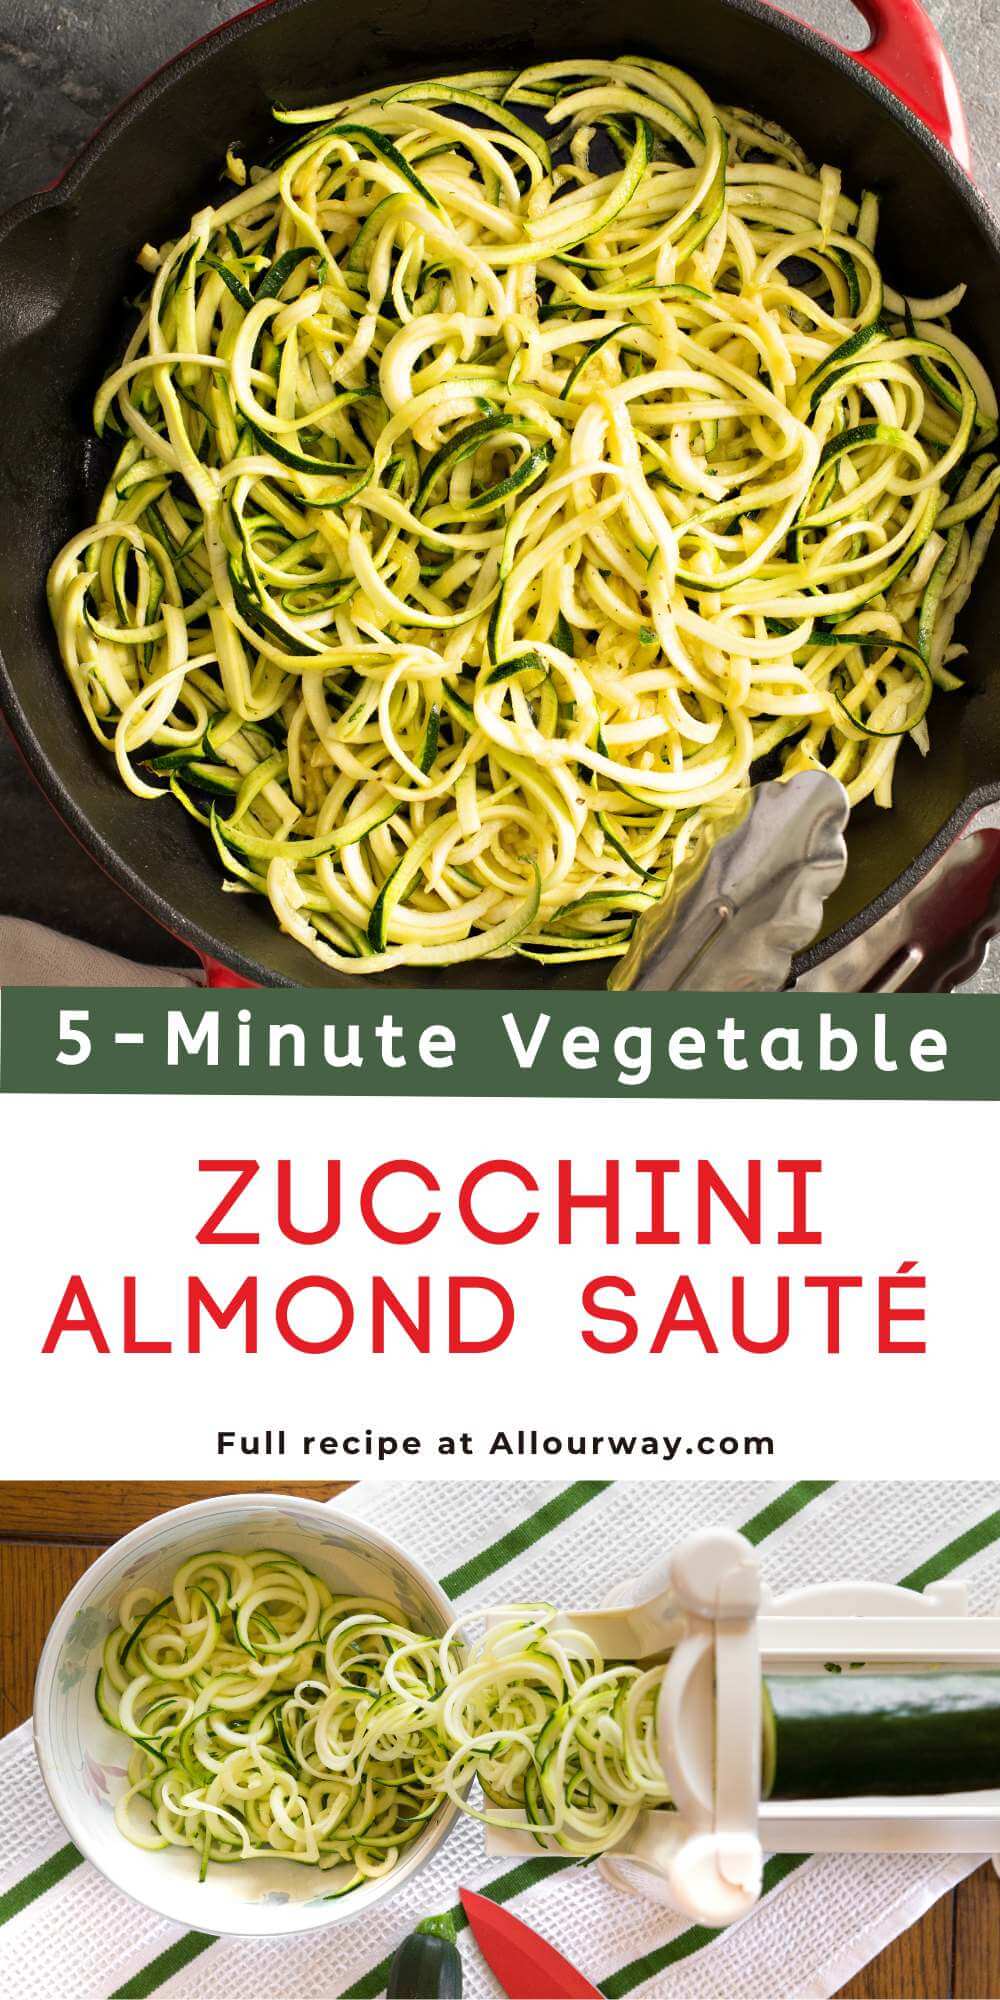 Pinterest image with title overlay for Zucchini Almond Sauté recipe.